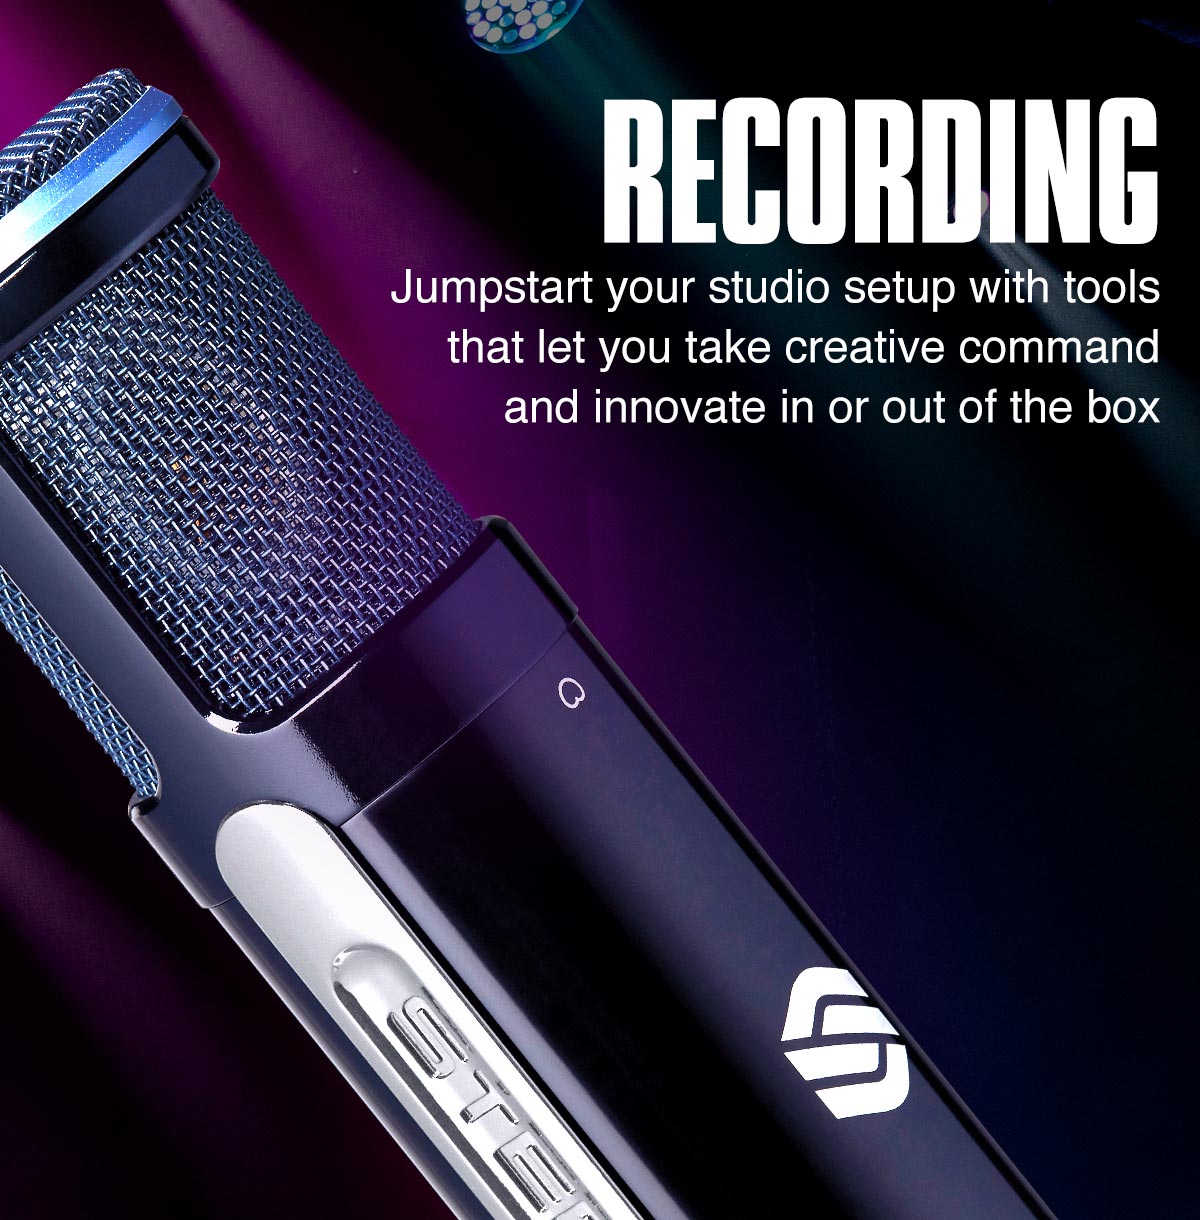 Recording. Jumpstart your studio with tools that let you take creative and innovate in or out of the box.